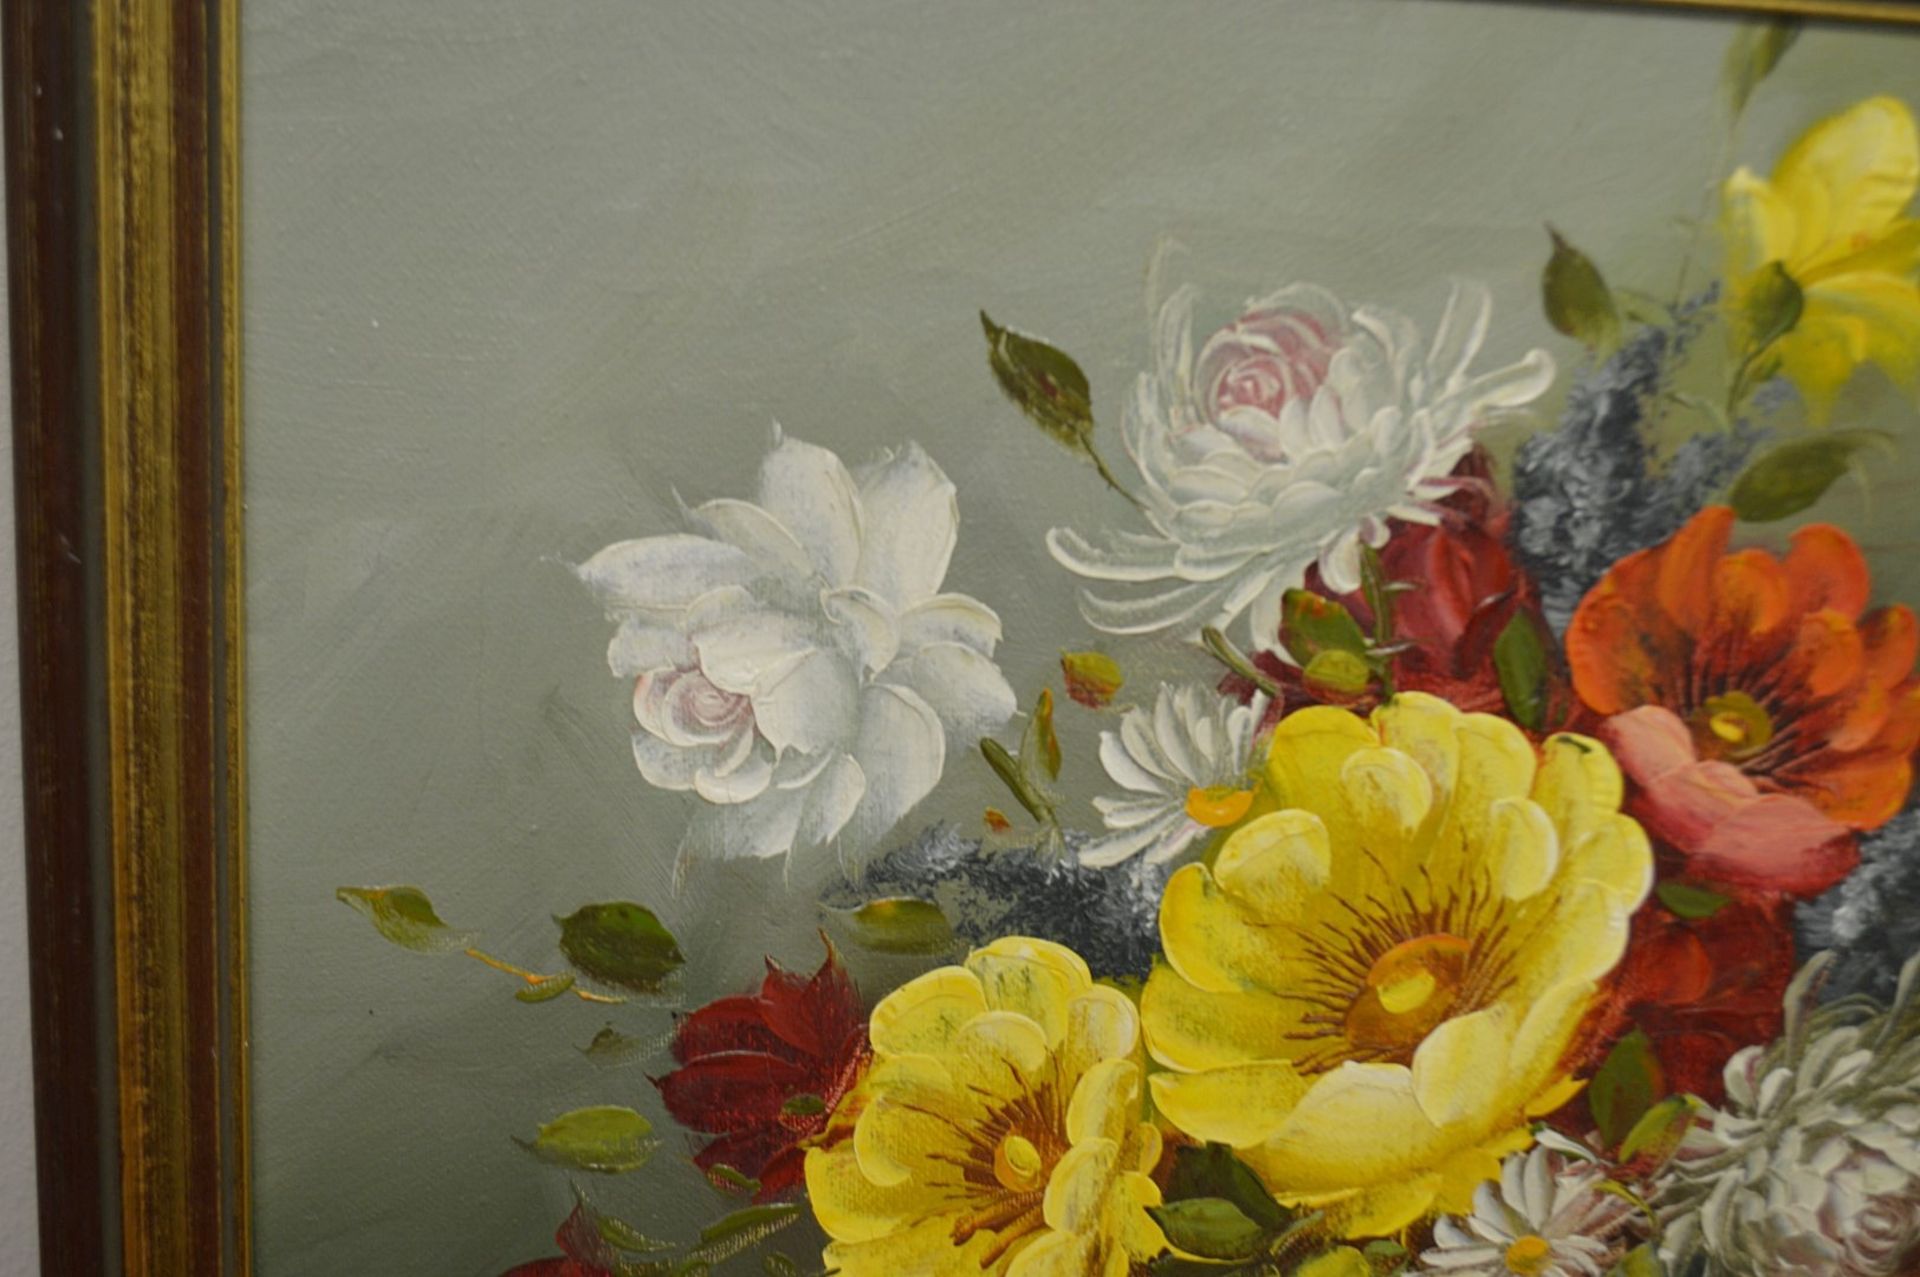 1 x Original Oil Painting Of Flowers On Canvas - Signed By The Artist - Dimensions: 36 x 46cm - Ref: - Image 2 of 6